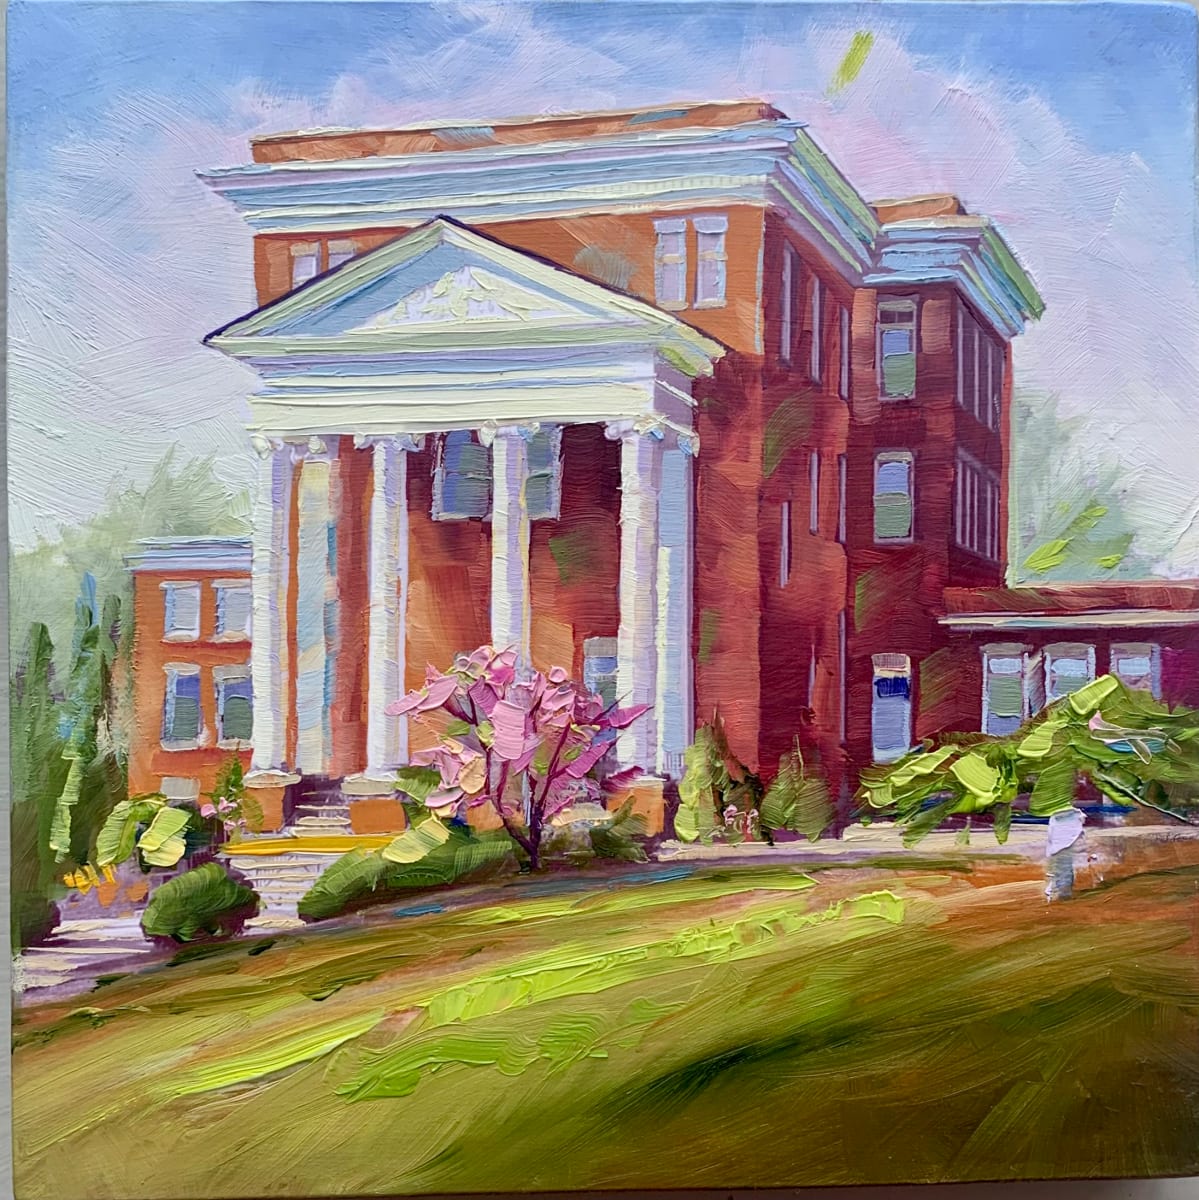 Carnegie Hall in Spring by Pat Cross  Image: 6x6 oil painting